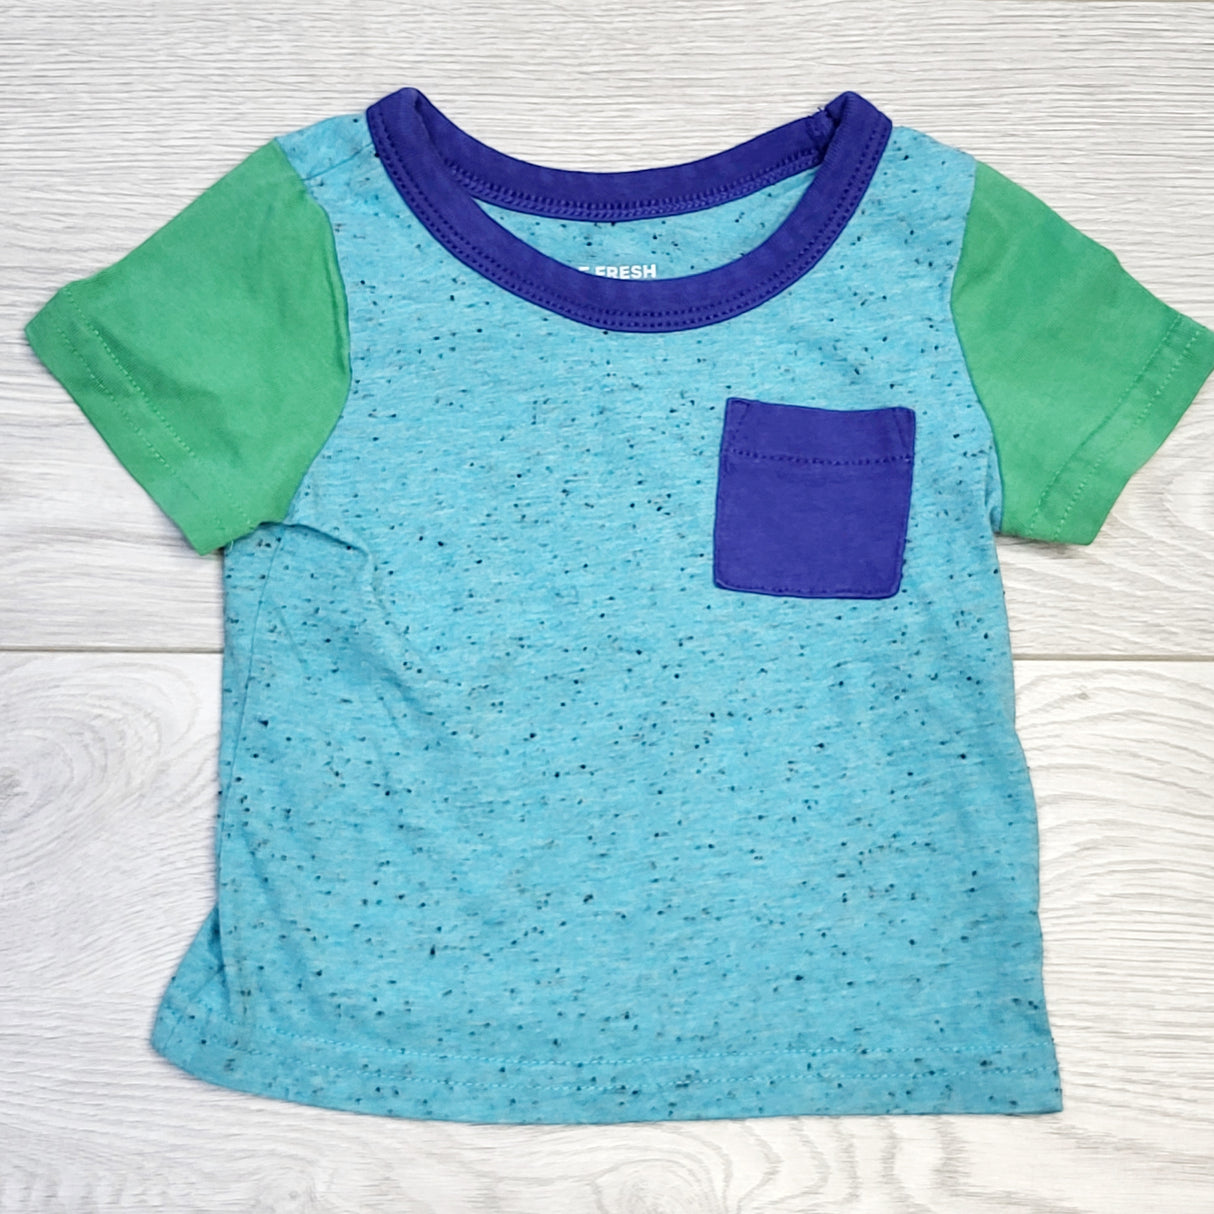 CHOL1 - Joe speckled blue and green t-shirt, size 3-6 months